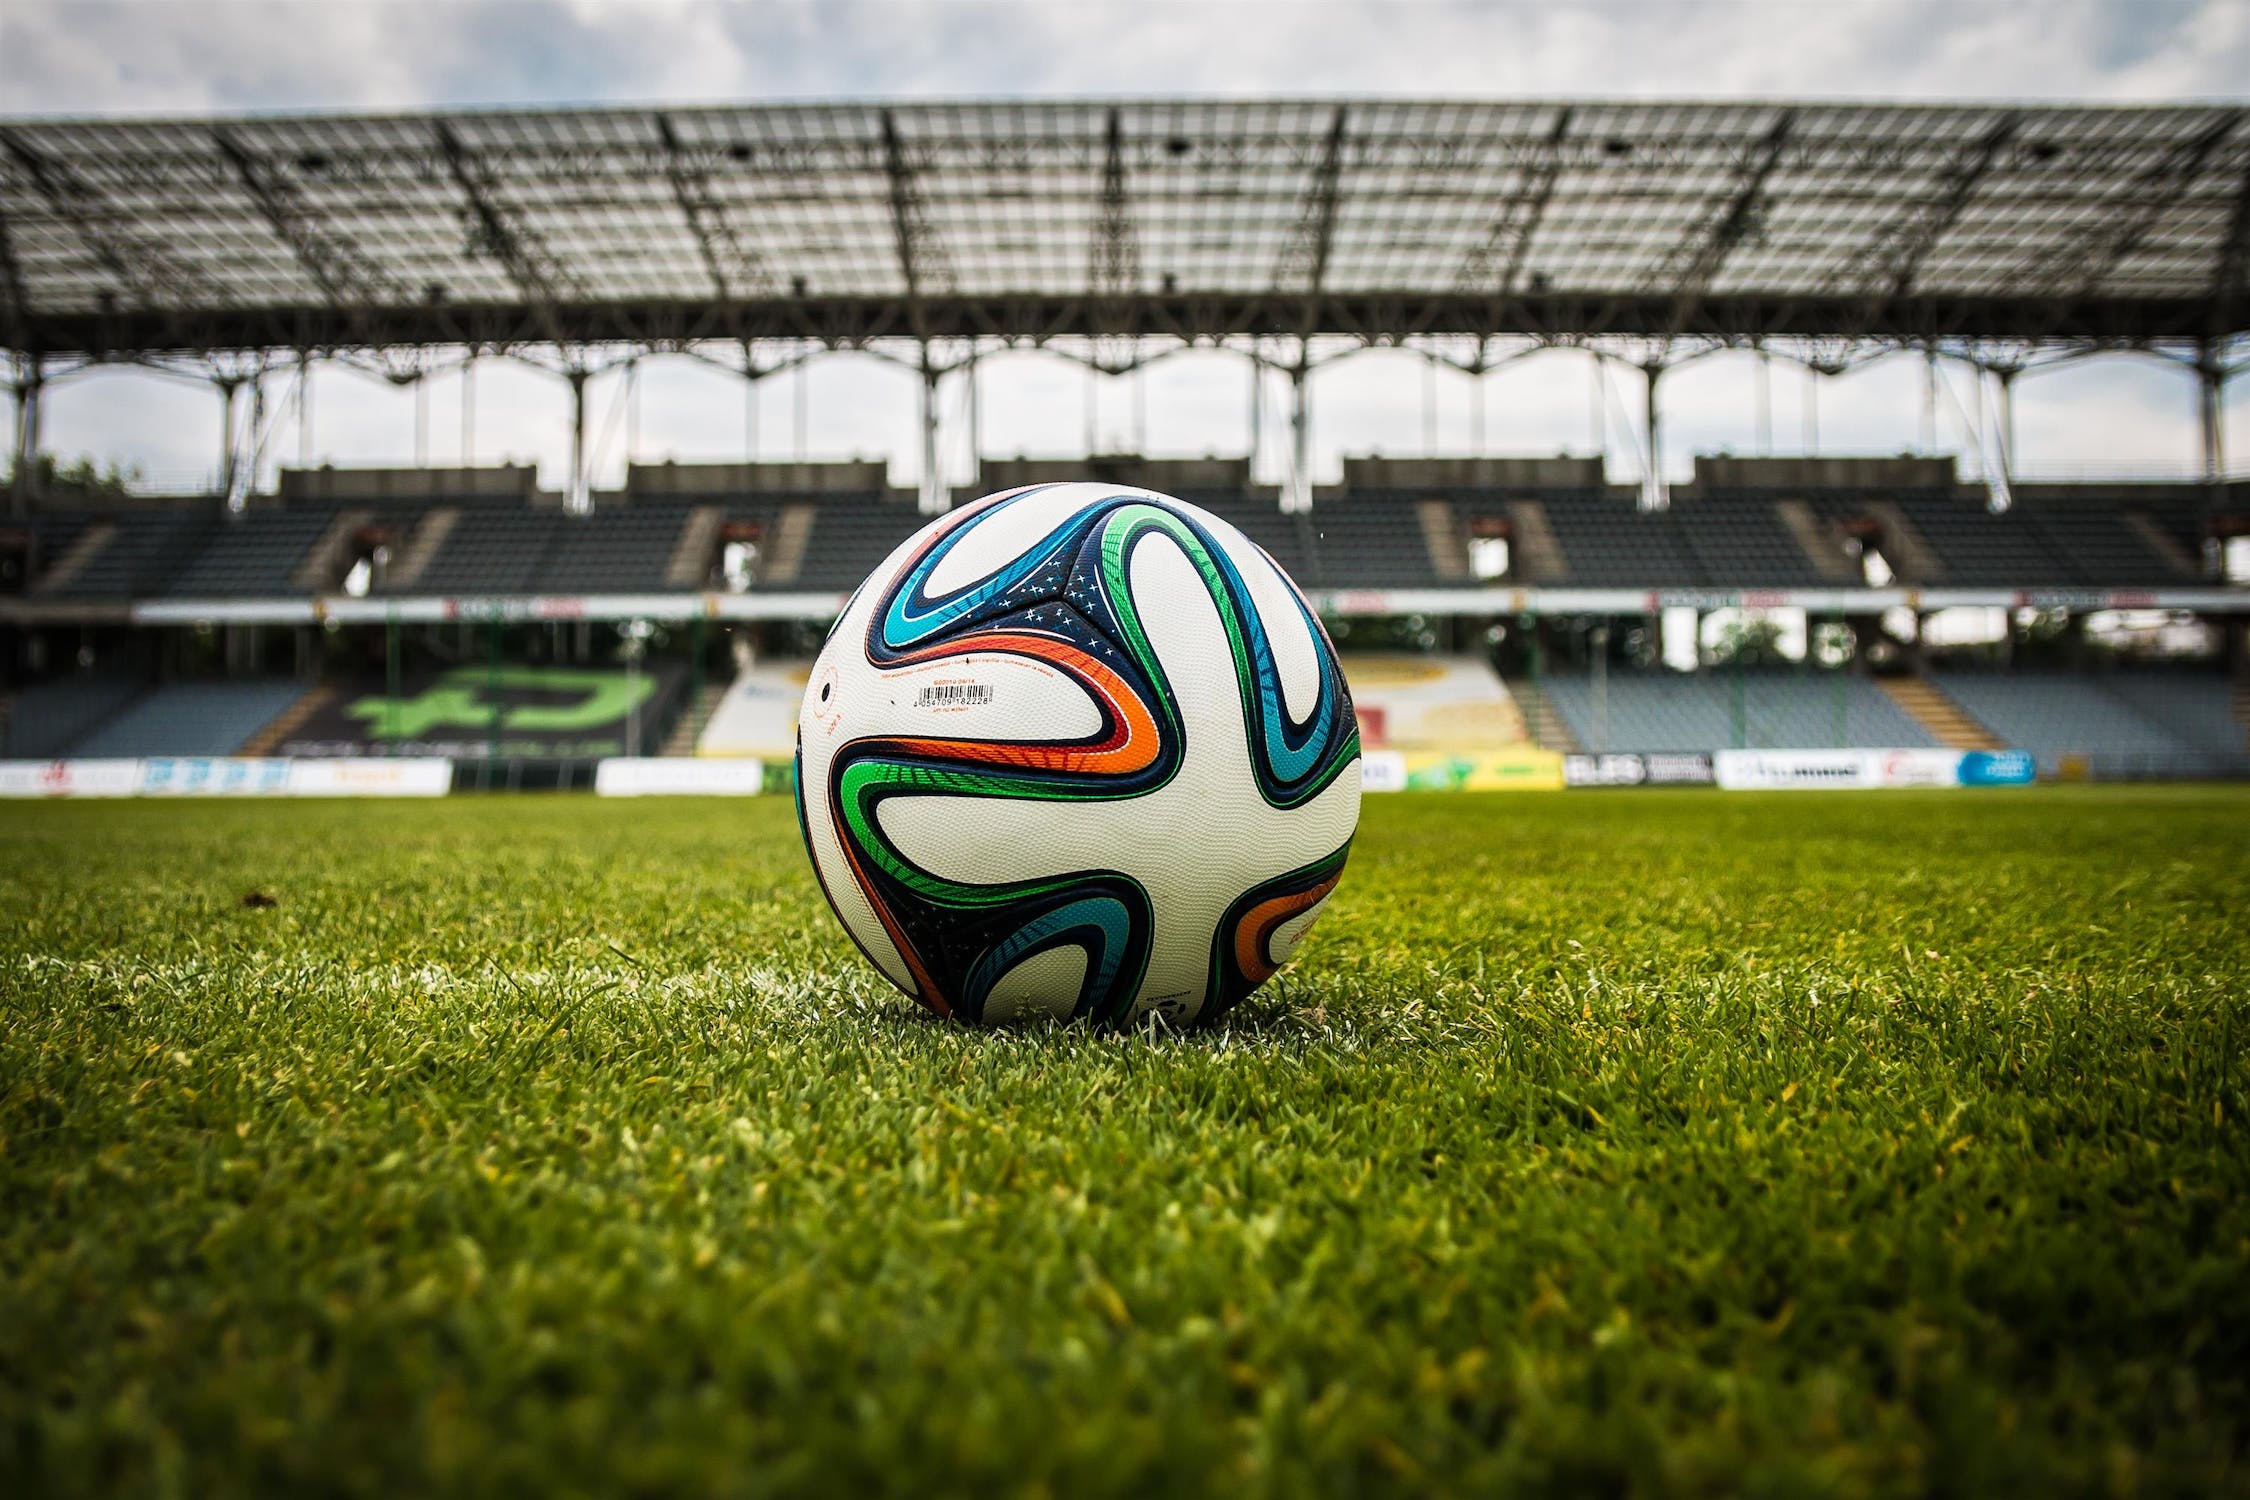 https://soccerex.com/wp-content/uploads/2023/08/the-ball-stadion-football-the-pitch-47730.jpeg